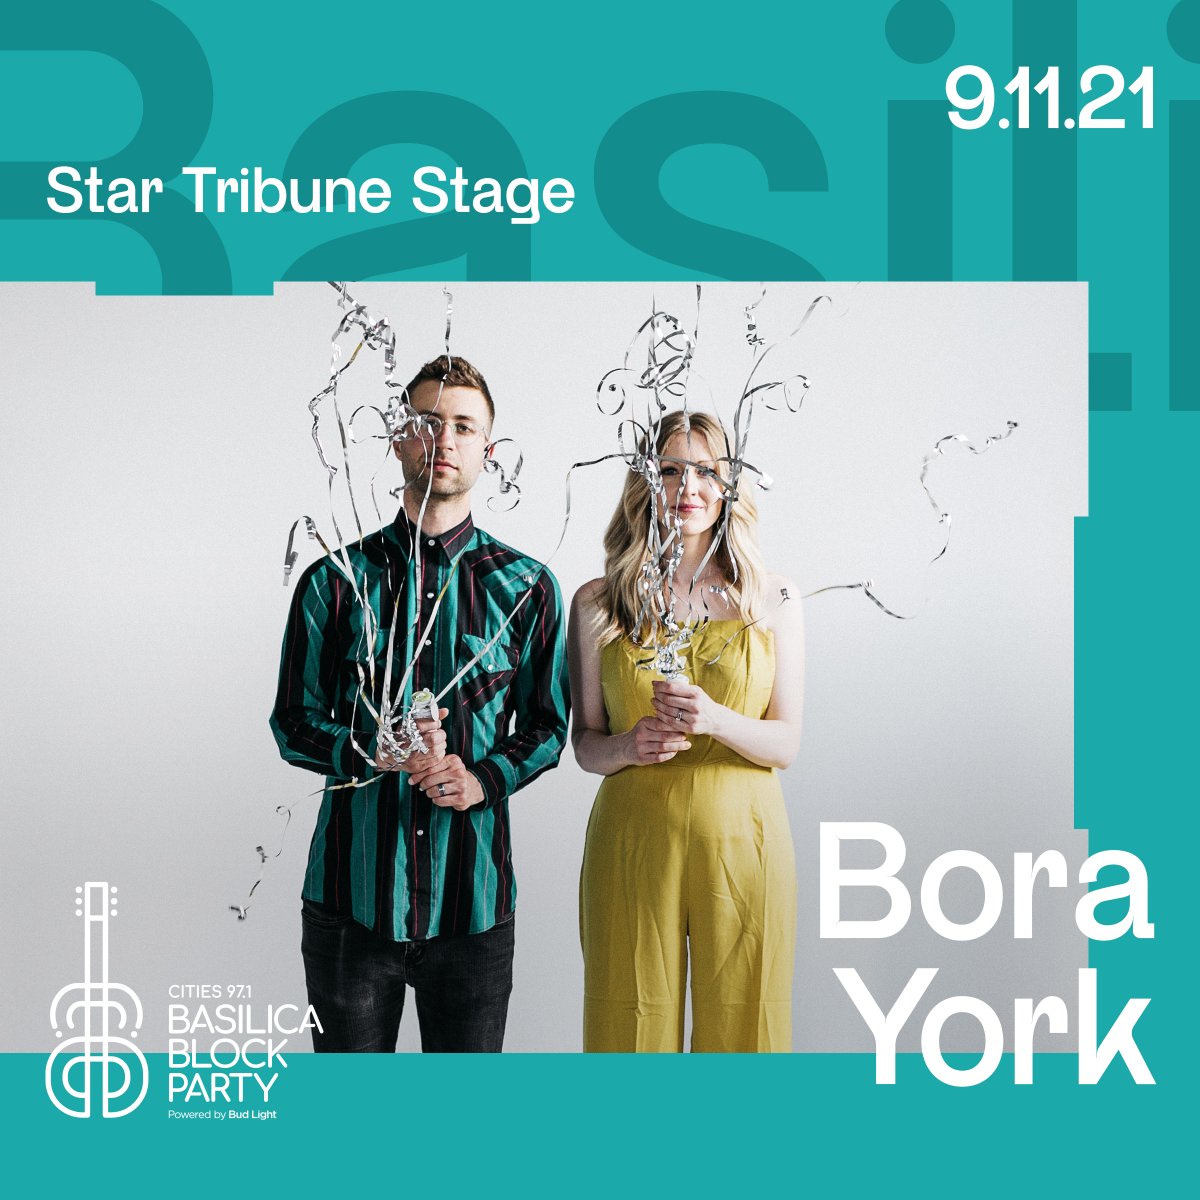 See @dianerapz, @SOHRband, and @borayork on the @StarTribune Stage next Saturday, September 11. Tix at link in bio. #BBP2021 #cities971BBP @cities97radio